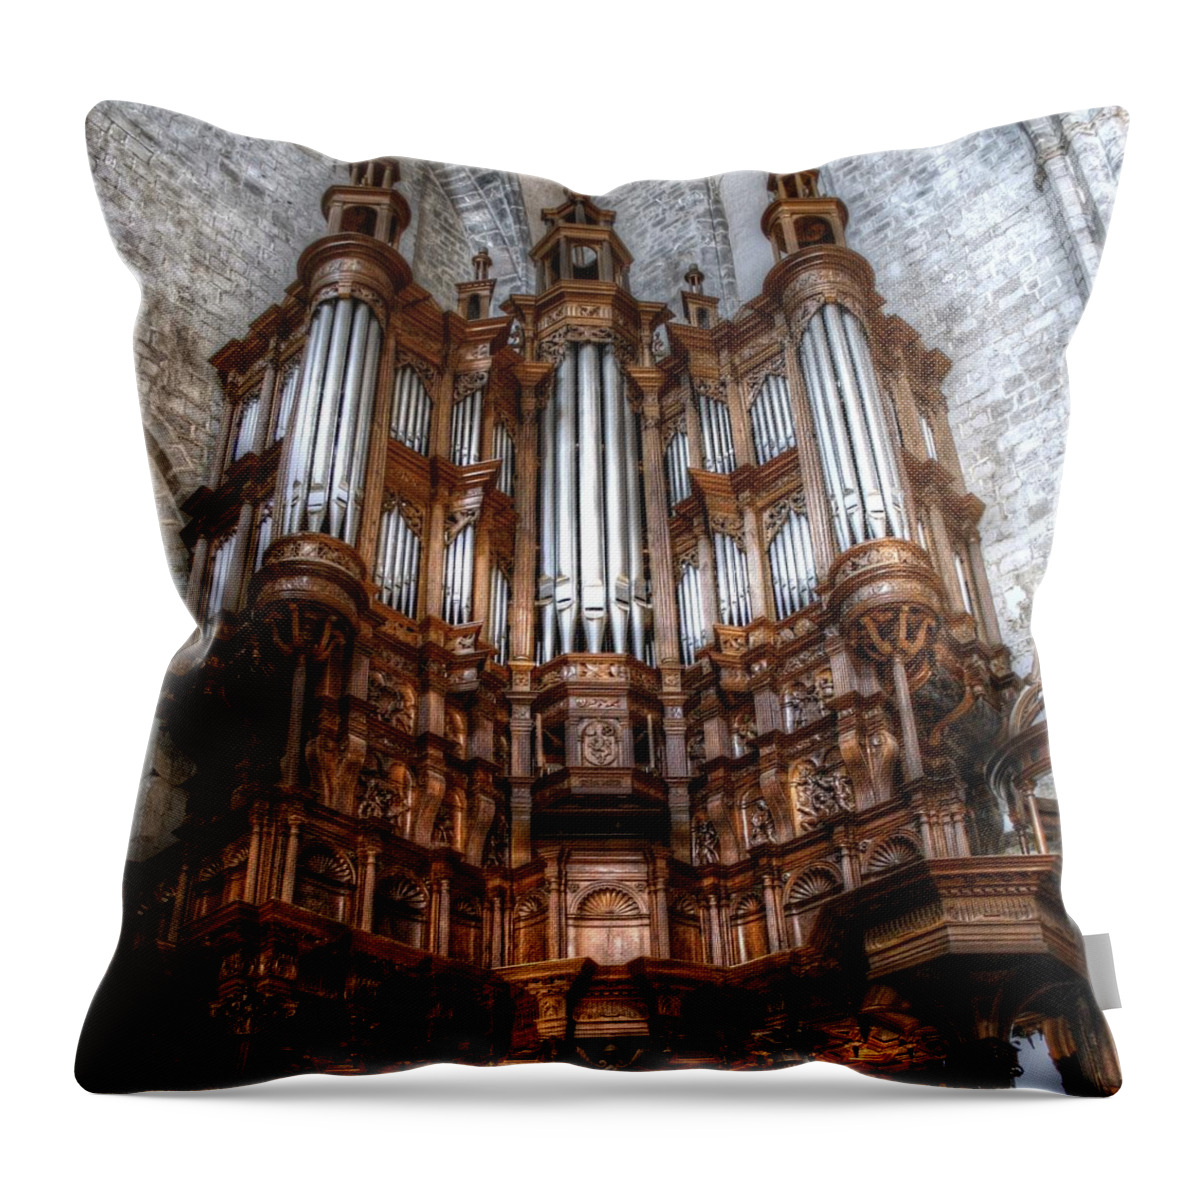 France Throw Pillow featuring the photograph Spooky organ by Jenny Setchell